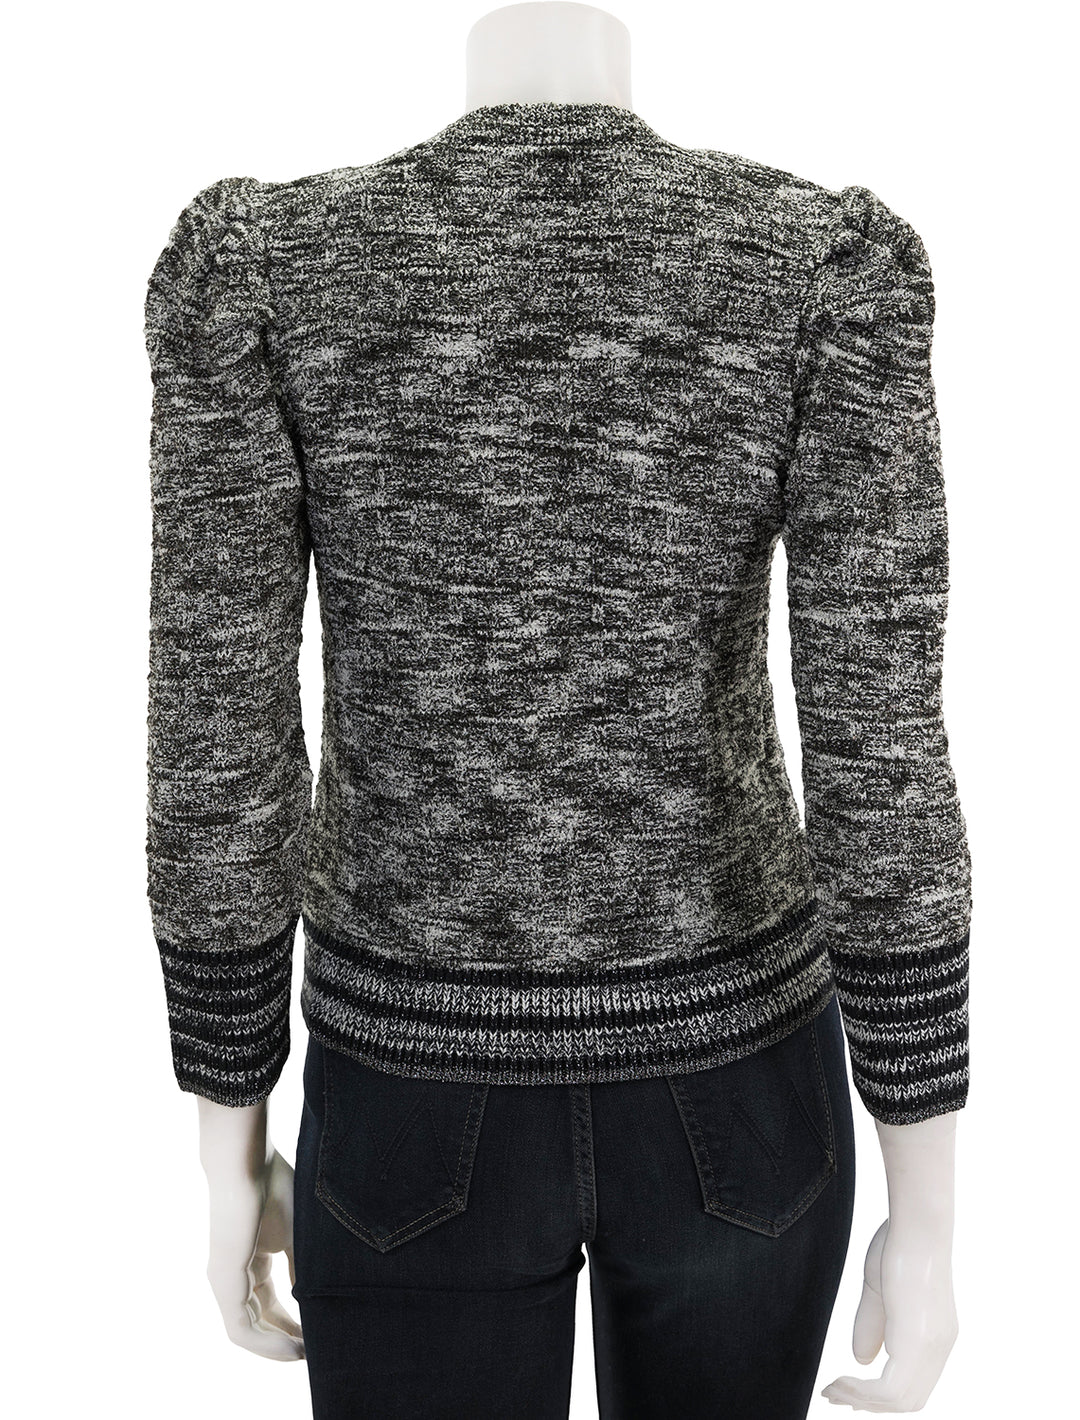 Back view of L'agence's jenni waffle stitch cardi in black and white multi.